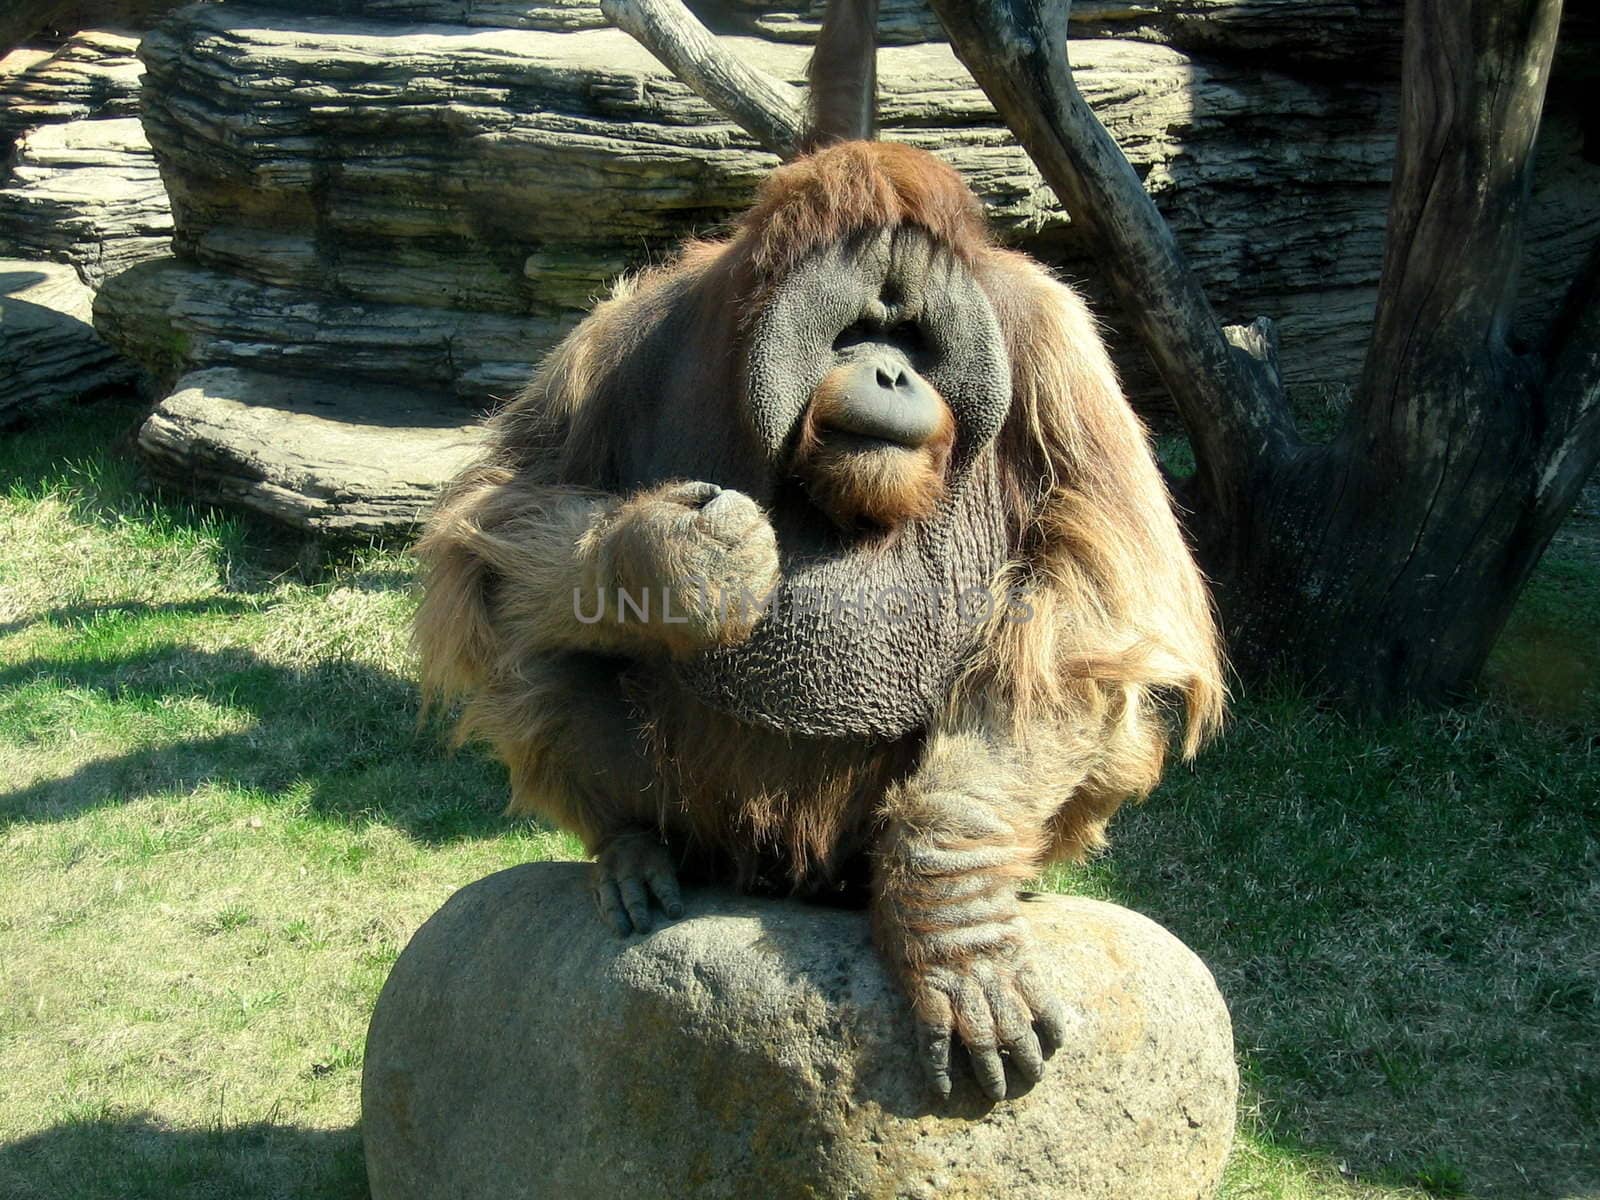 Angry orangutan sits on the rock and shows its fist